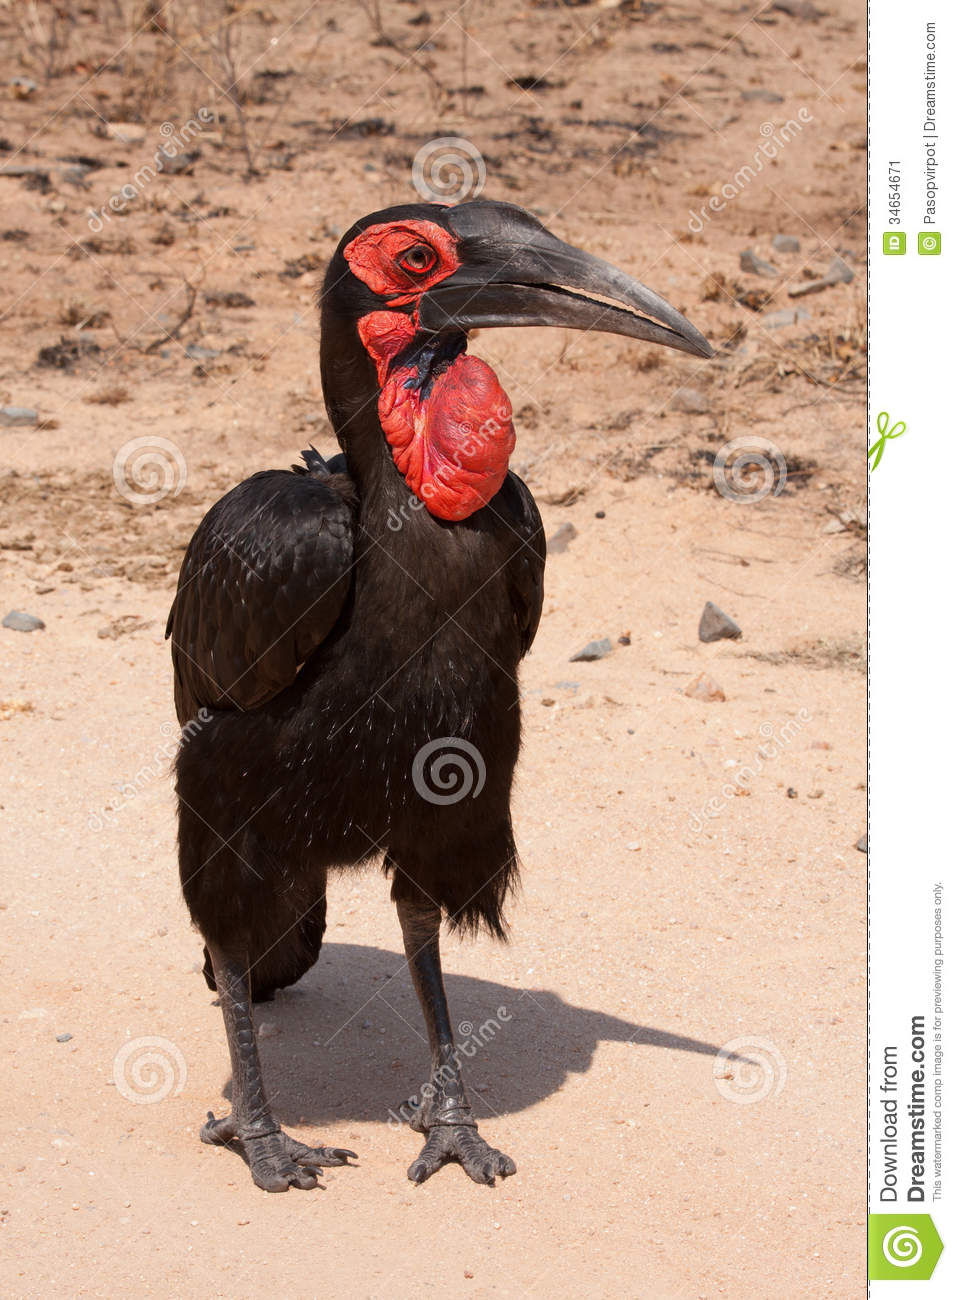 Southern Ground Hornbill clipart #8, Download drawings